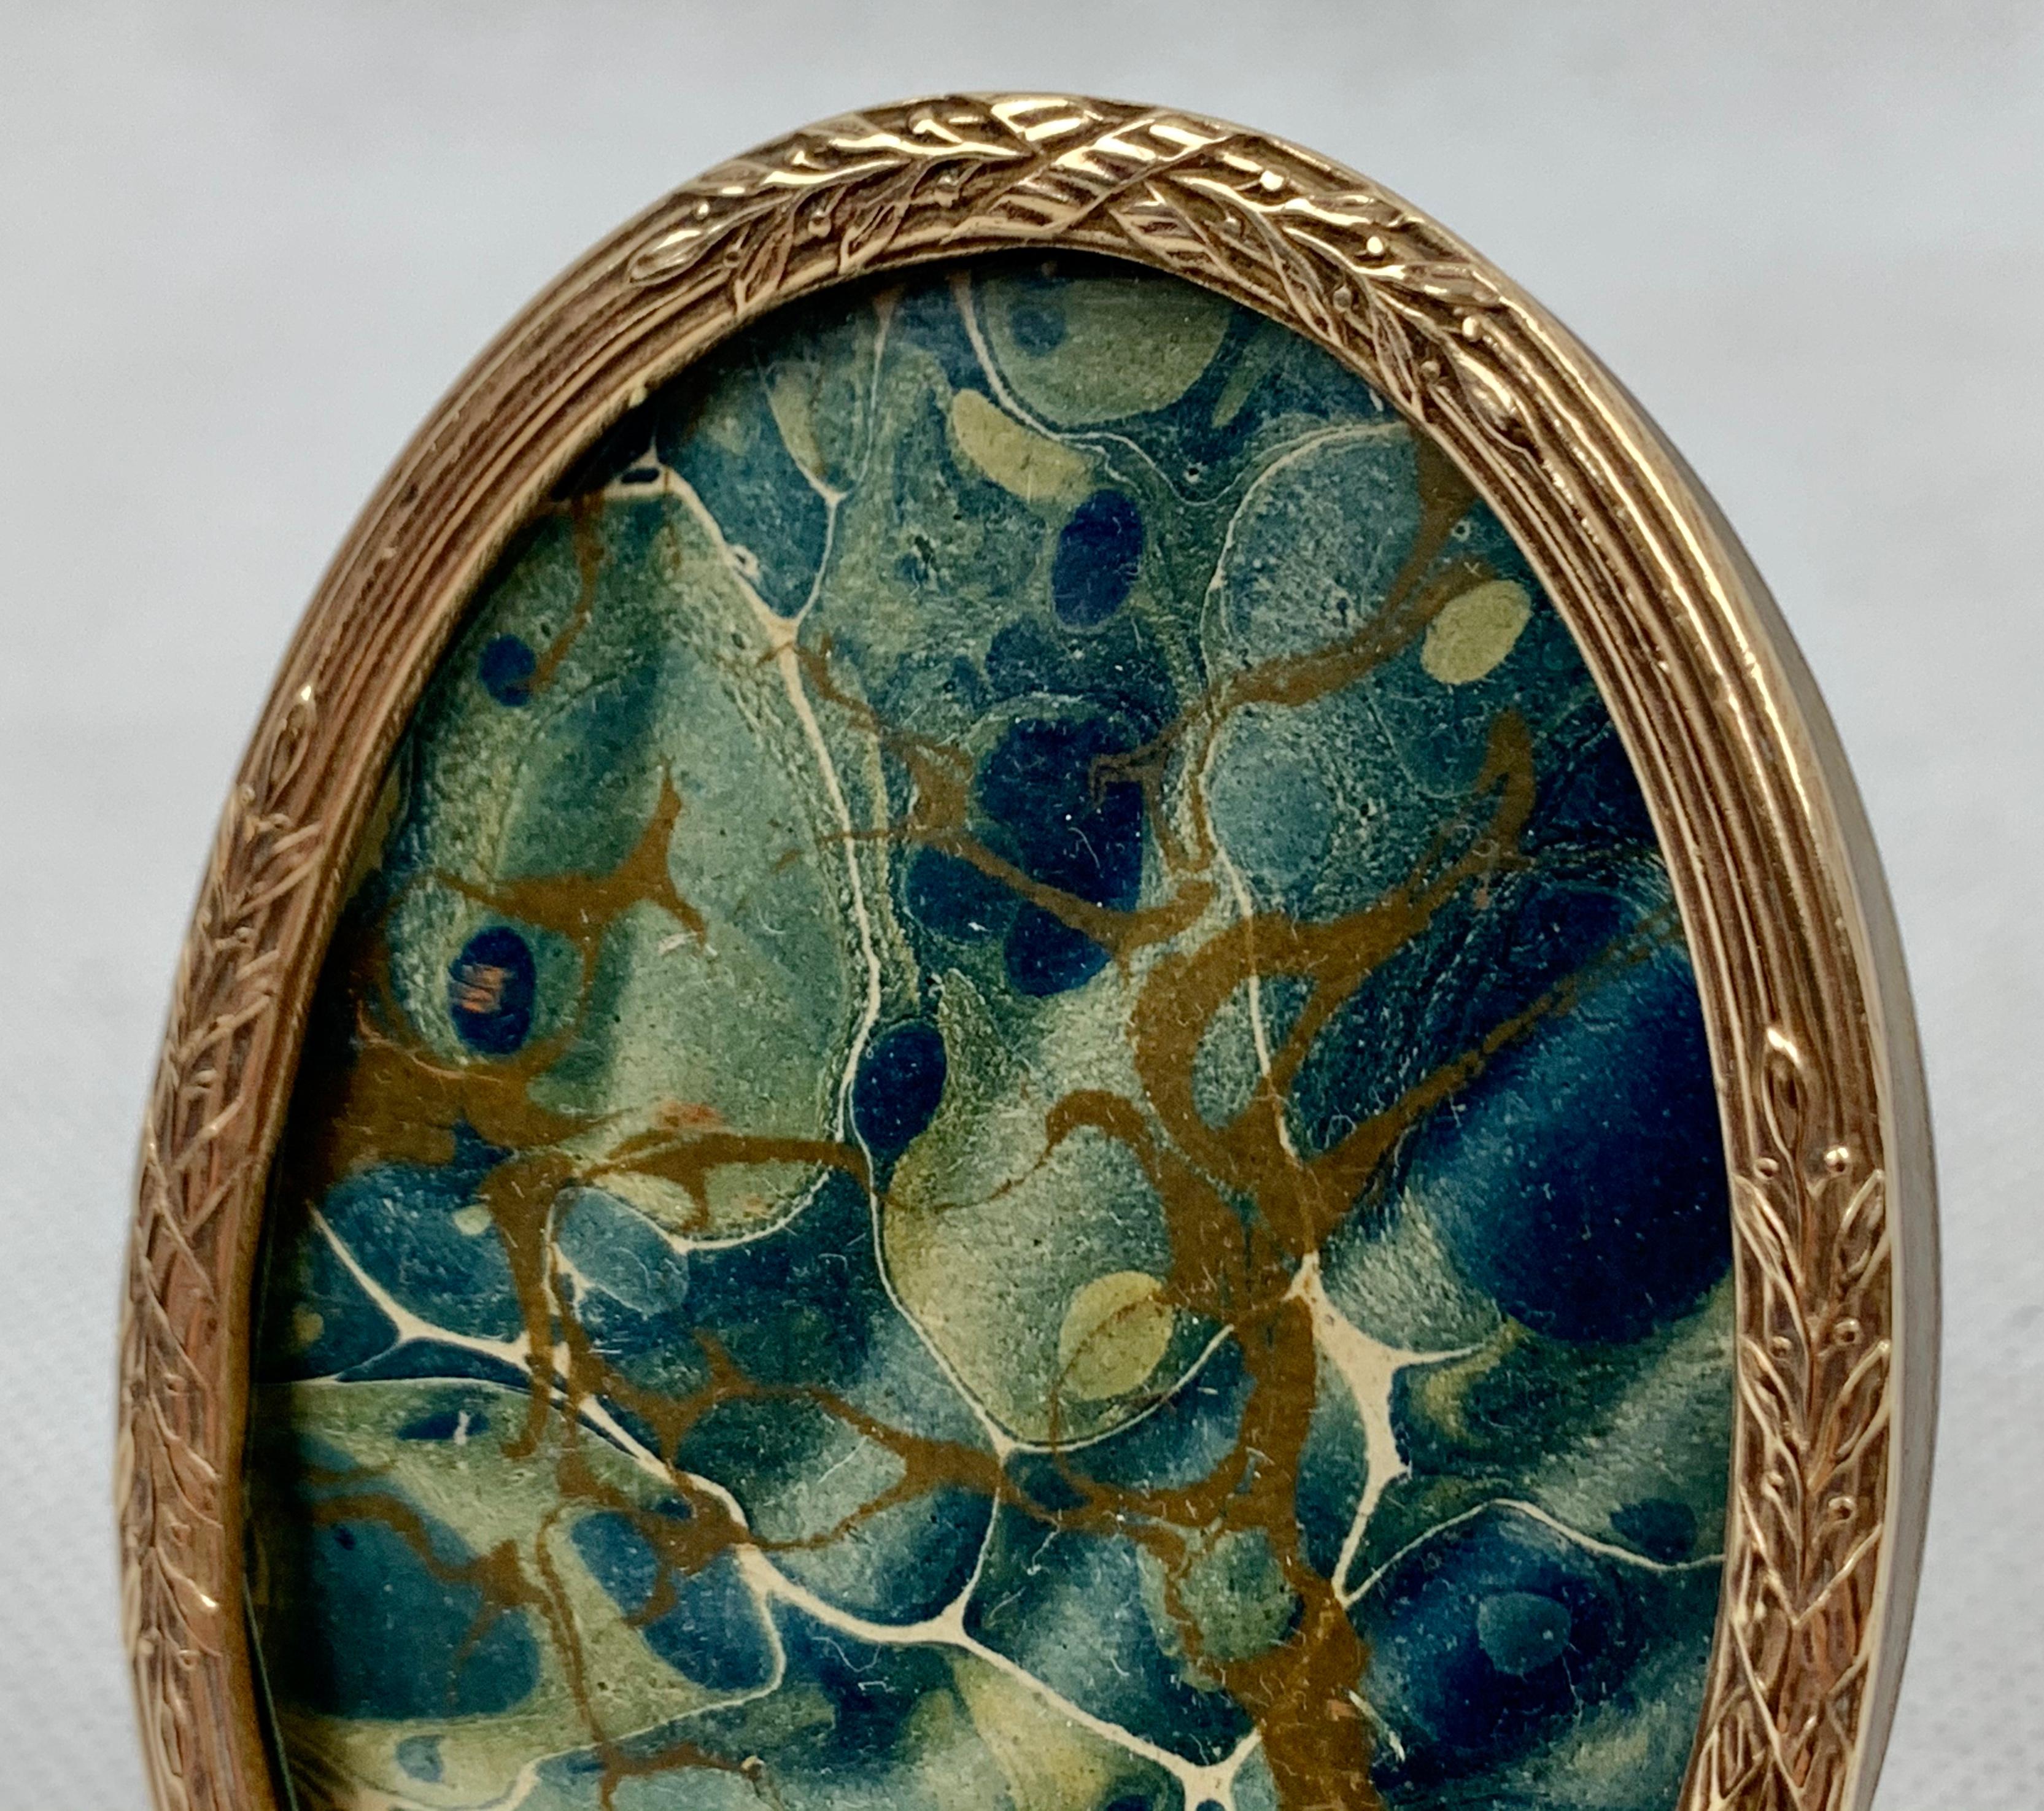 Small French oval Louis XVI gilt frame with a Classic motif of crossed ribbons over reeds. The frame has a split easel for support on the back.

Outer dimensions: H 2.25